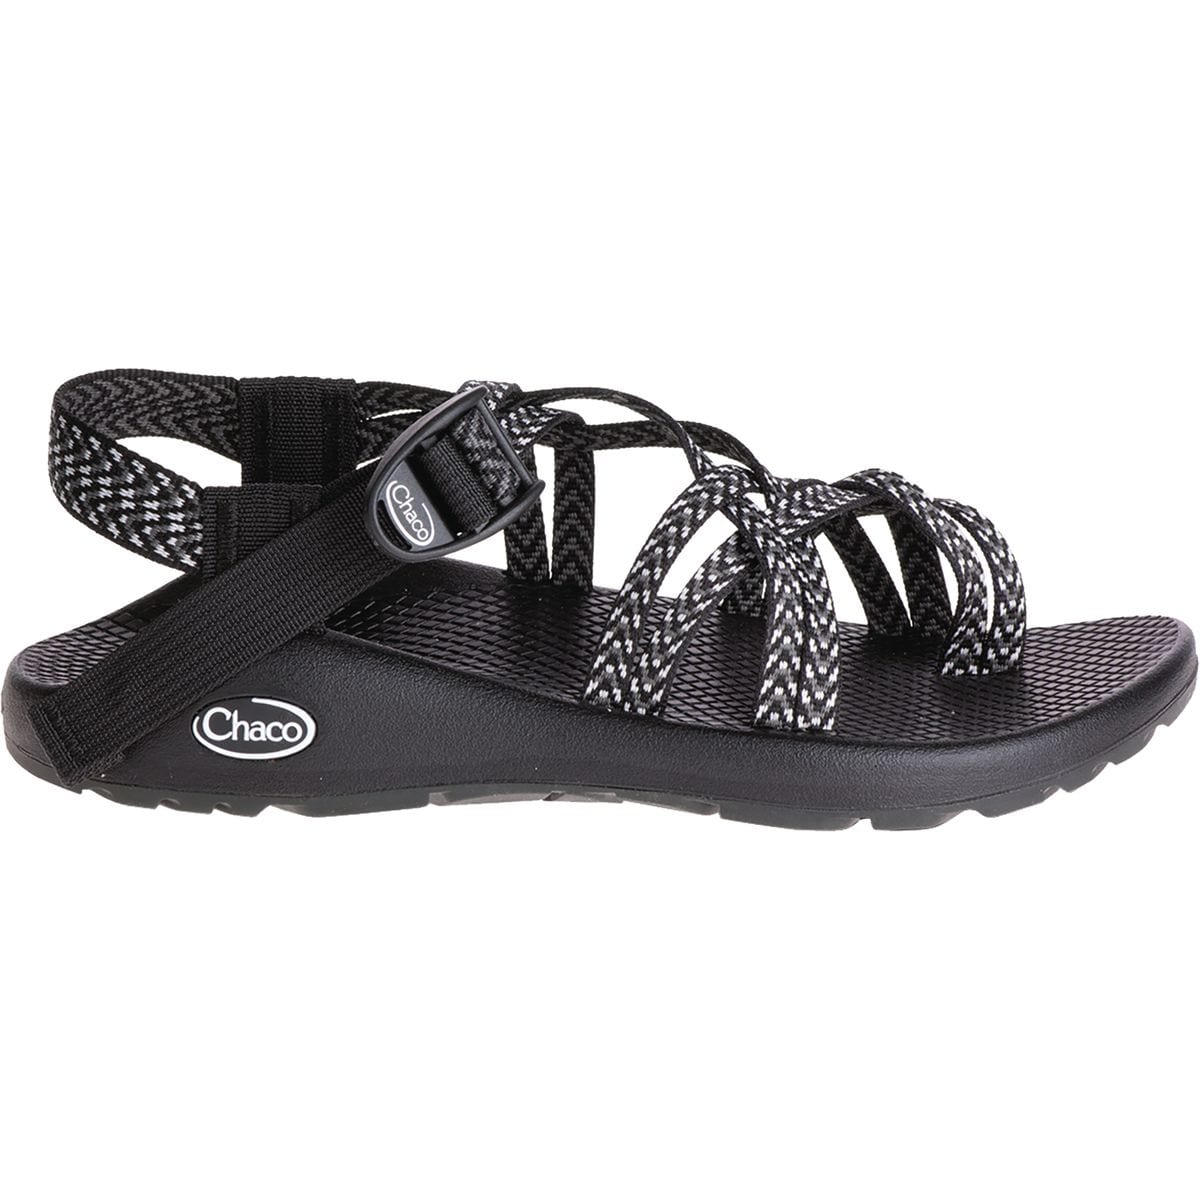 chacos zx